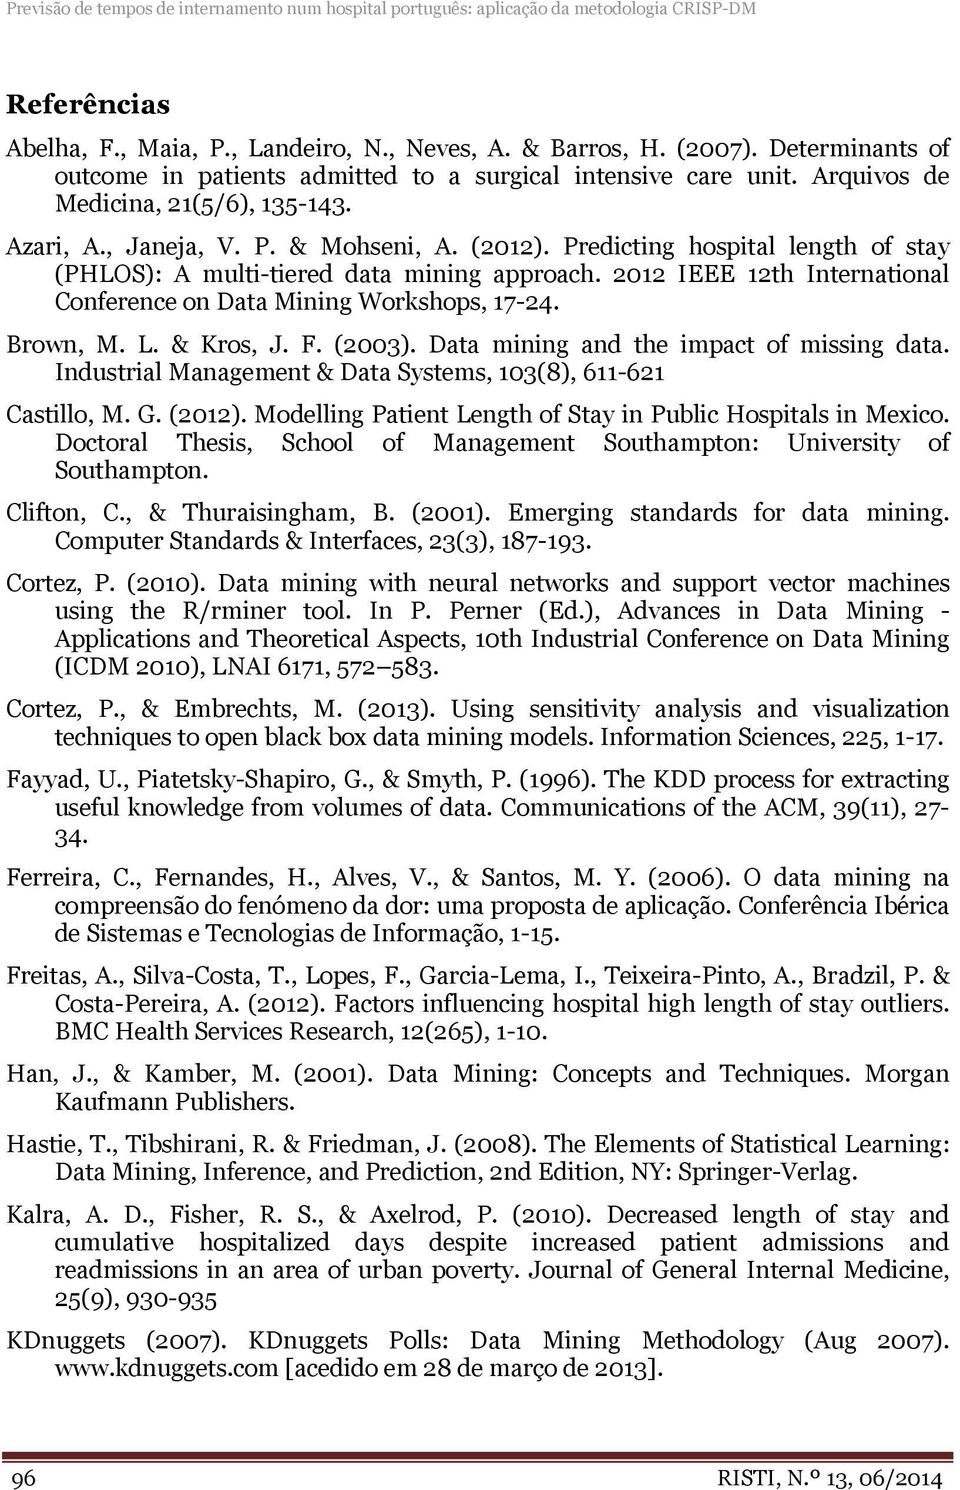 Predicting hospital length of stay (PHLOS): A multi-tiered data mining approach. 2012 IEEE 12th International Conference on Data Mining Workshops, 17-24. Brown, M. L. & Kros, J. F. (2003).